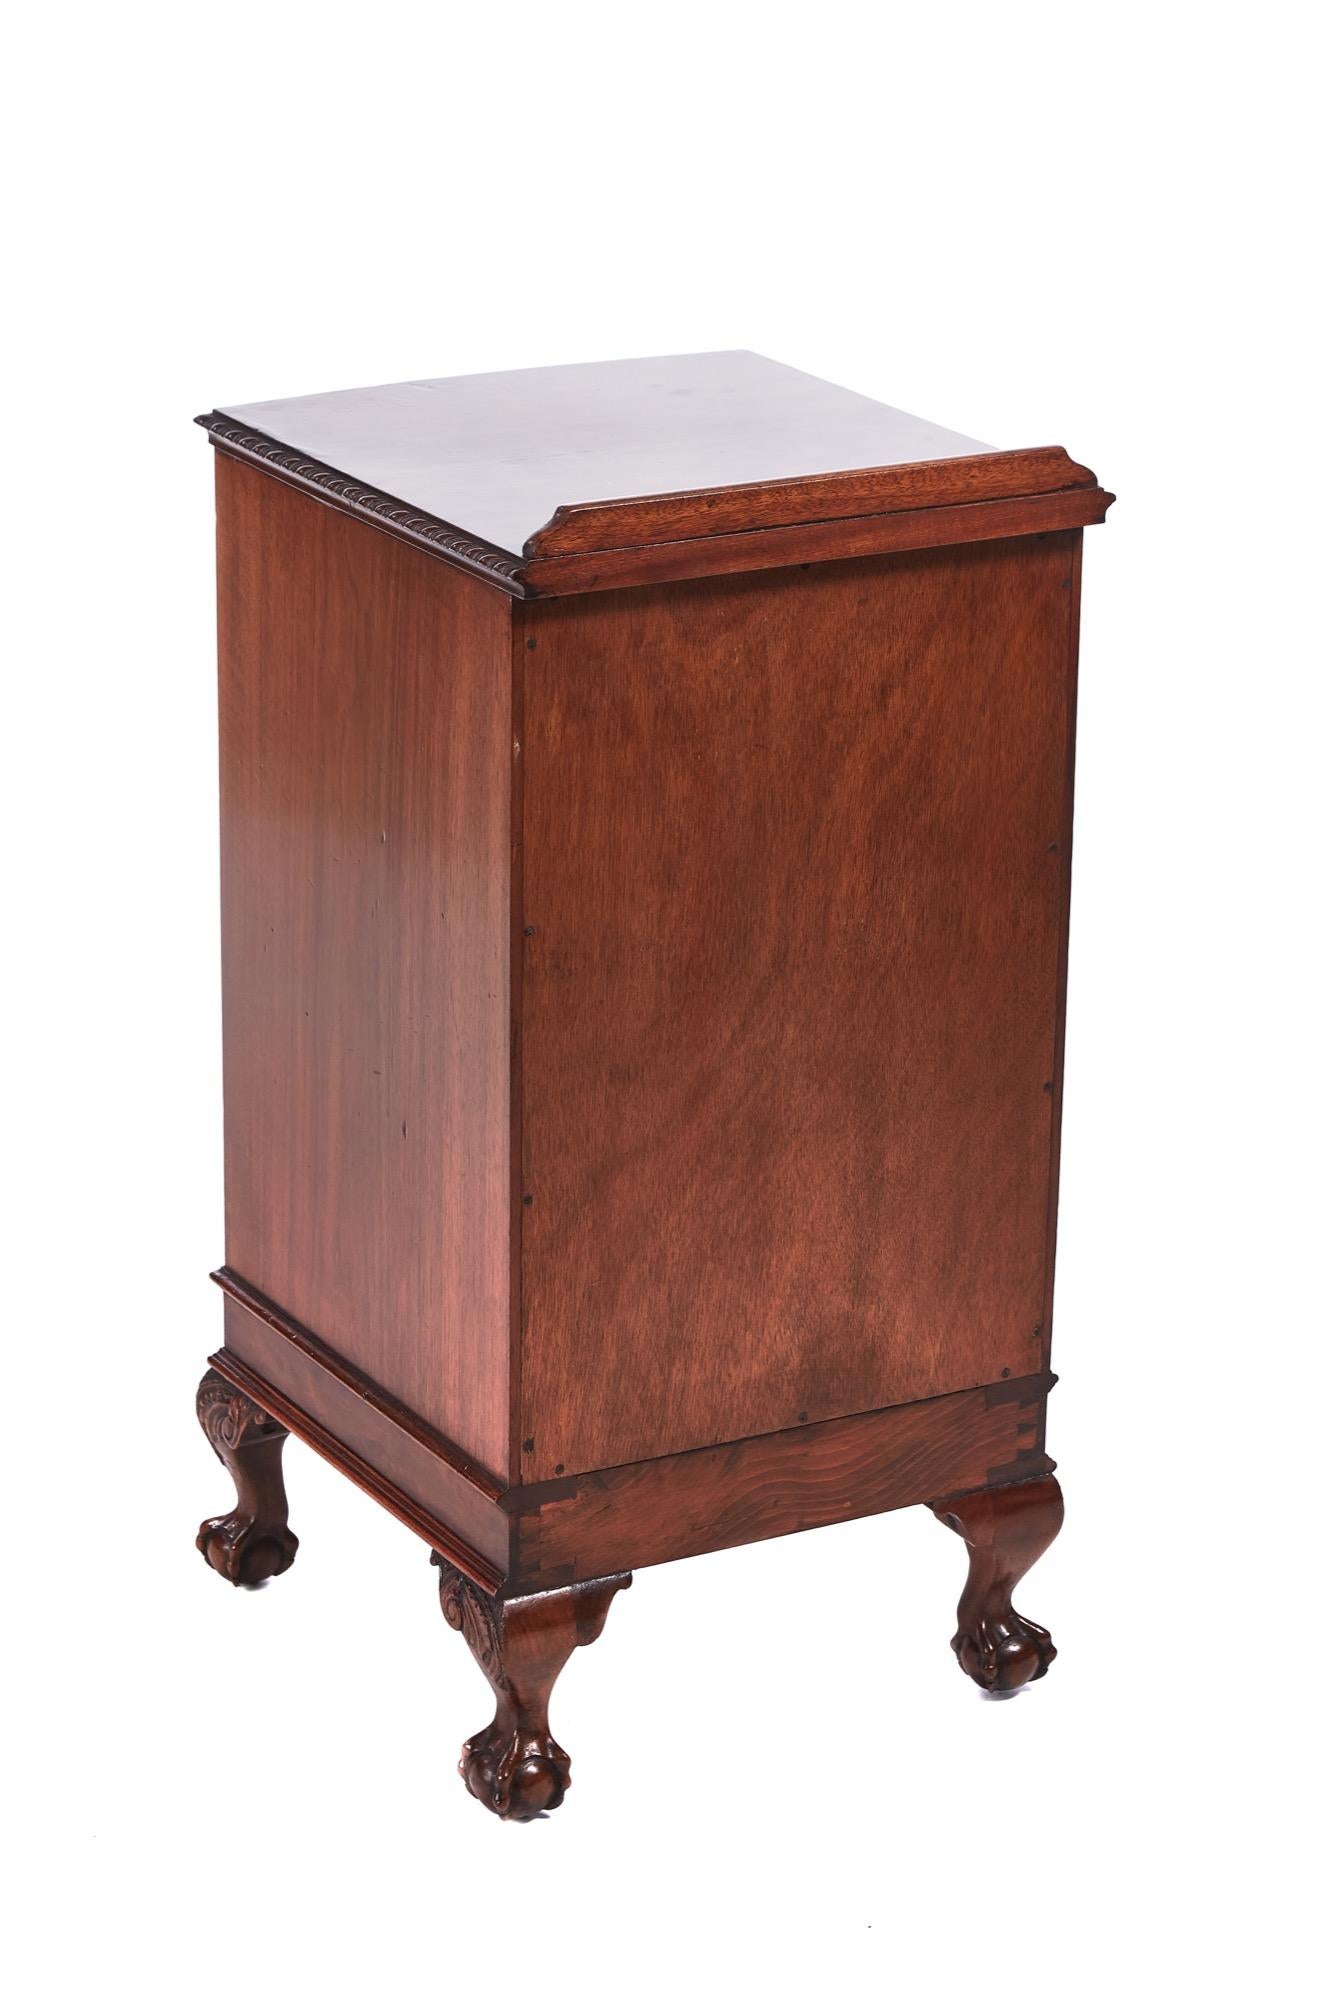 Antique burr walnut bow fronted bedside cabinet which has a lovely quality burr walnut top with a carved edge, 1 drawer with original brass handle, 1 long door with original brass handle and standing on 4 shaped carved cabriole legs with claw and